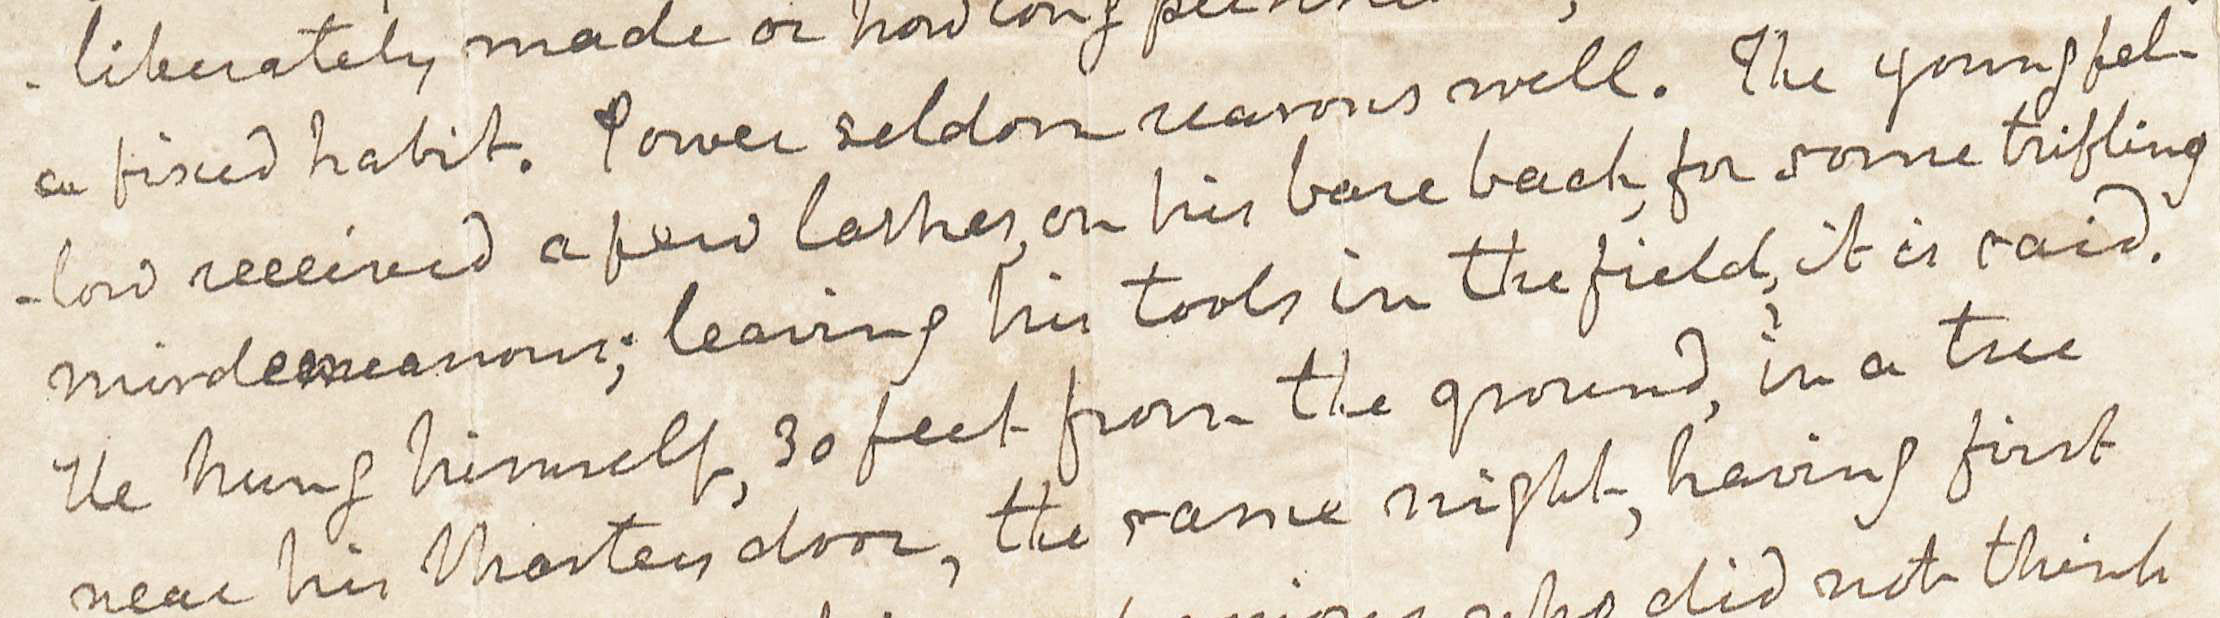 Detail of letter from Randolph to , regarding the beating and consequent suicide of an enslaved man. (Image by Petrina Jackson)